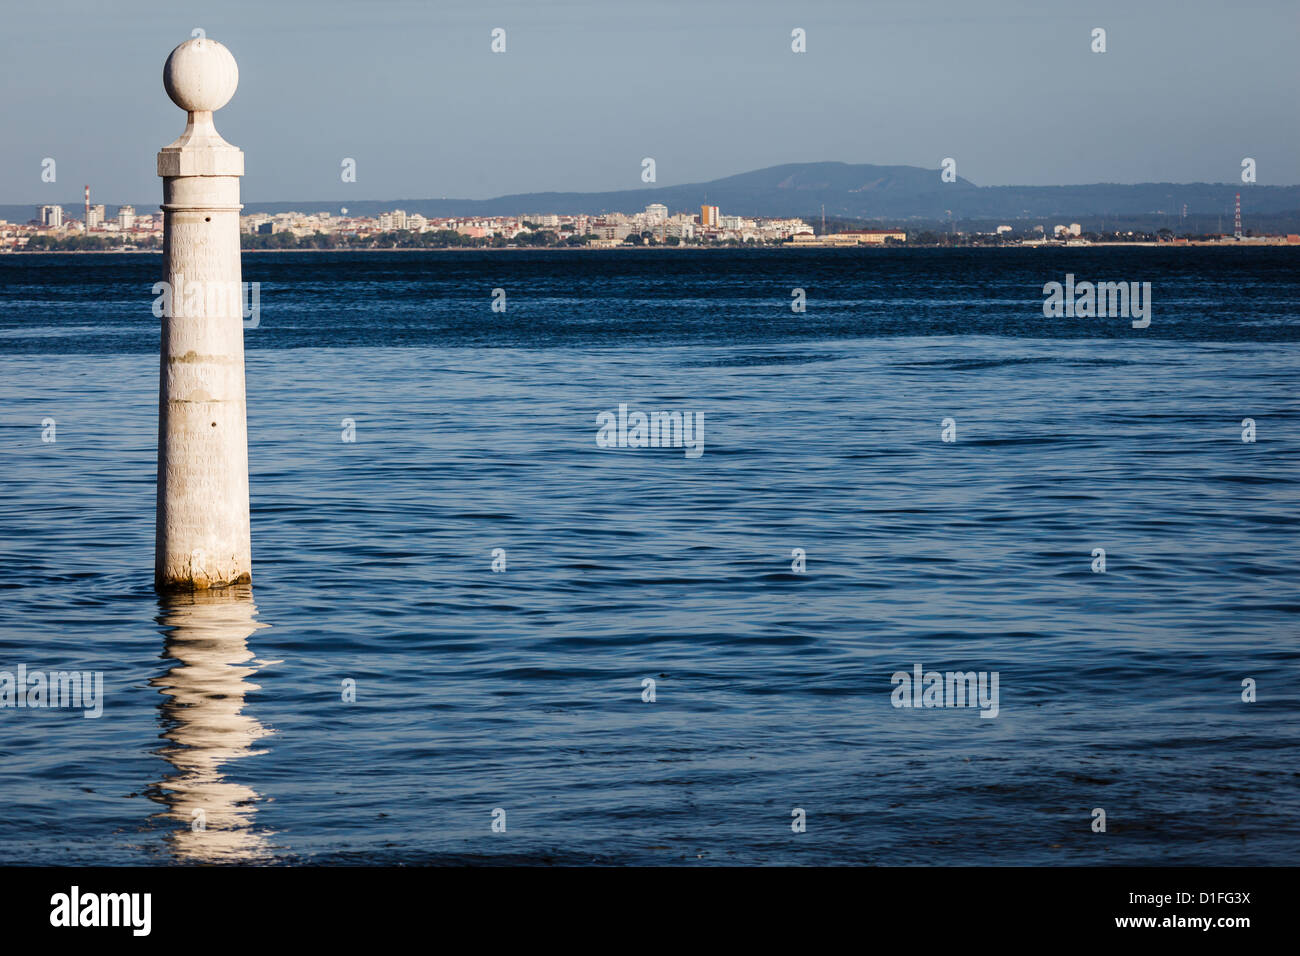 Boat mooring post in Lisbon, Portugal harbor with city in background Stock Photo